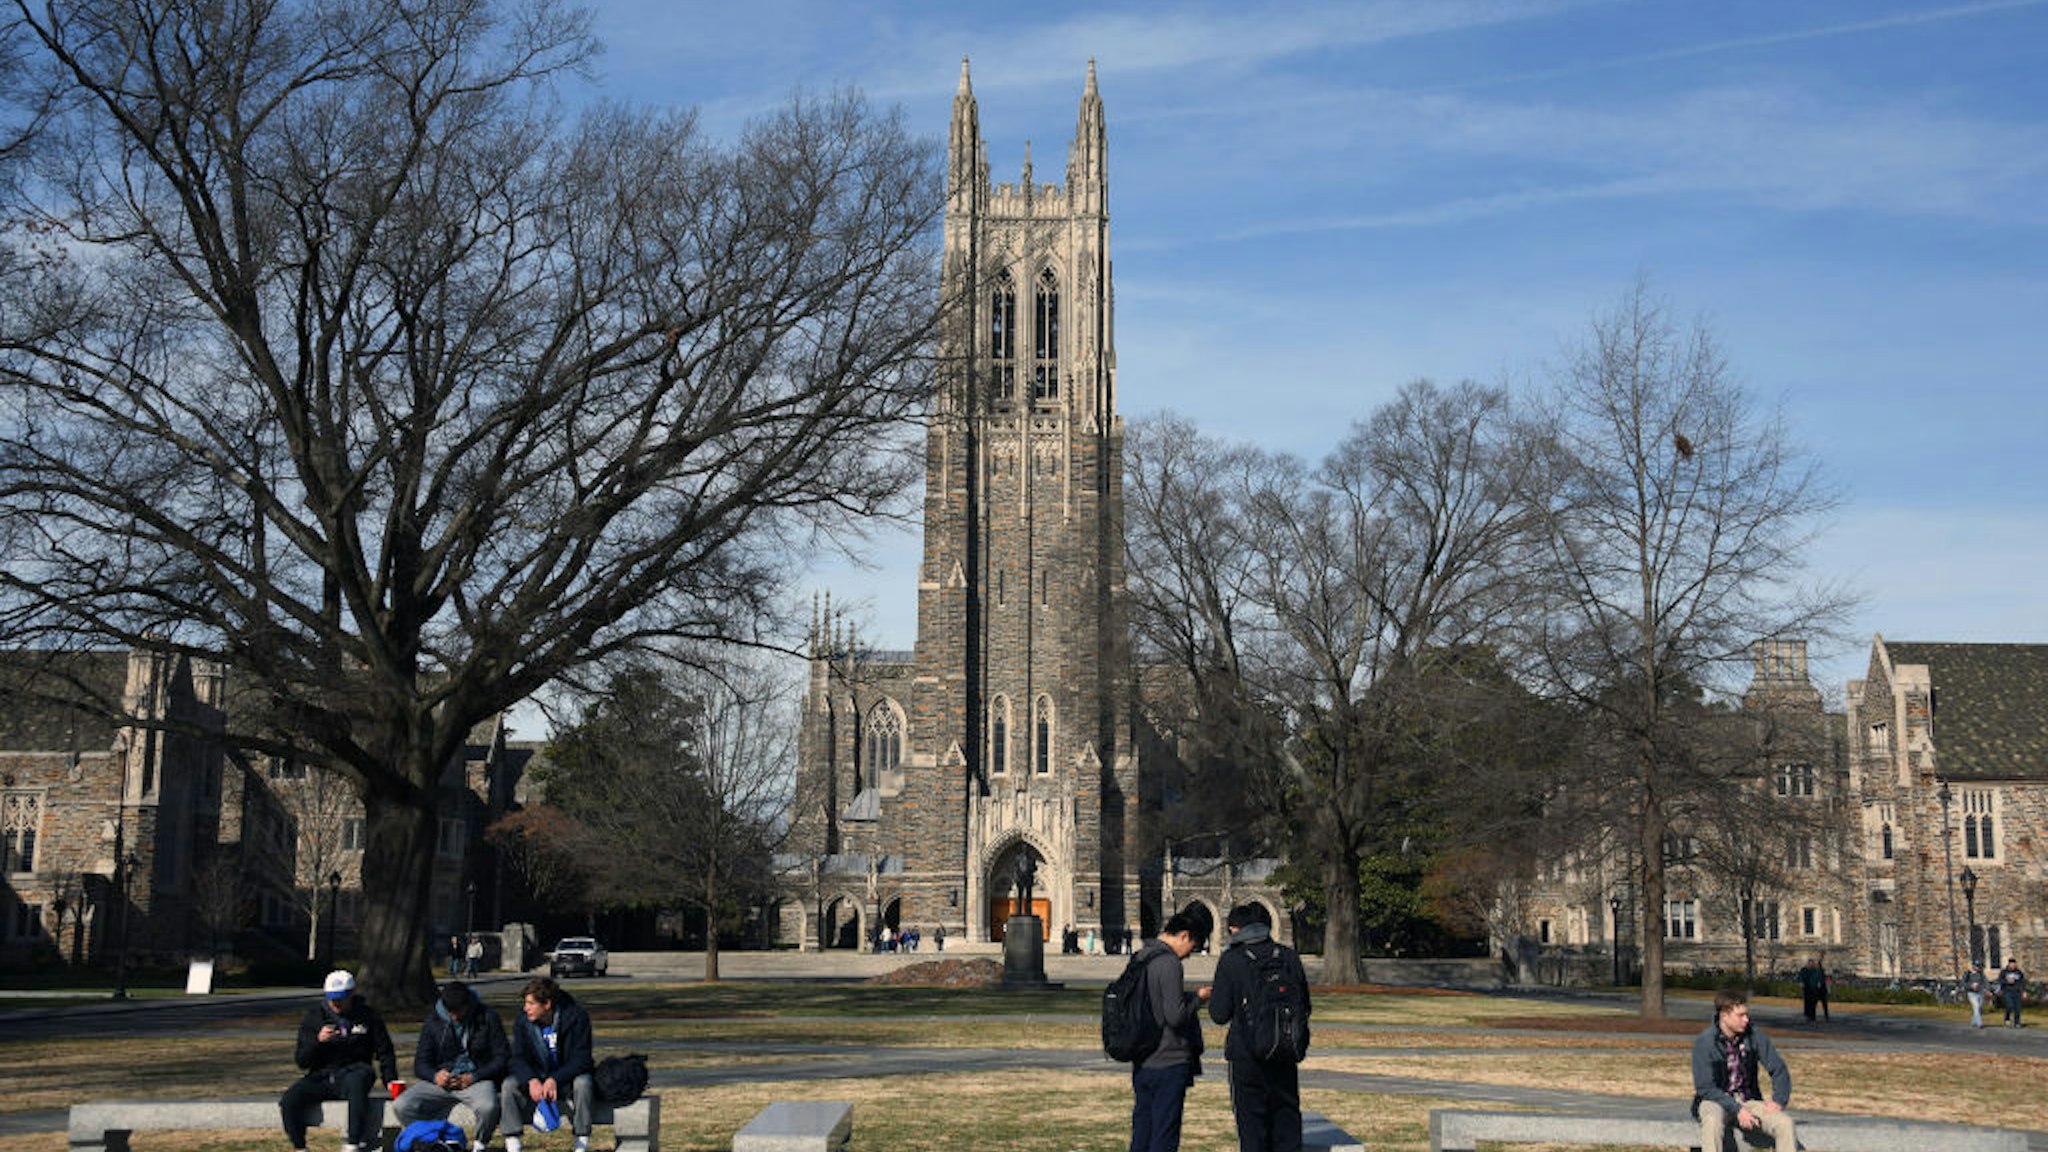 A general view of the Duke University Chapel on the campus of Duke University ahead of the game between the Virginia Cavaliers and the Duke Blue Devils on January 27, 2018 in Durham, North Carolina.